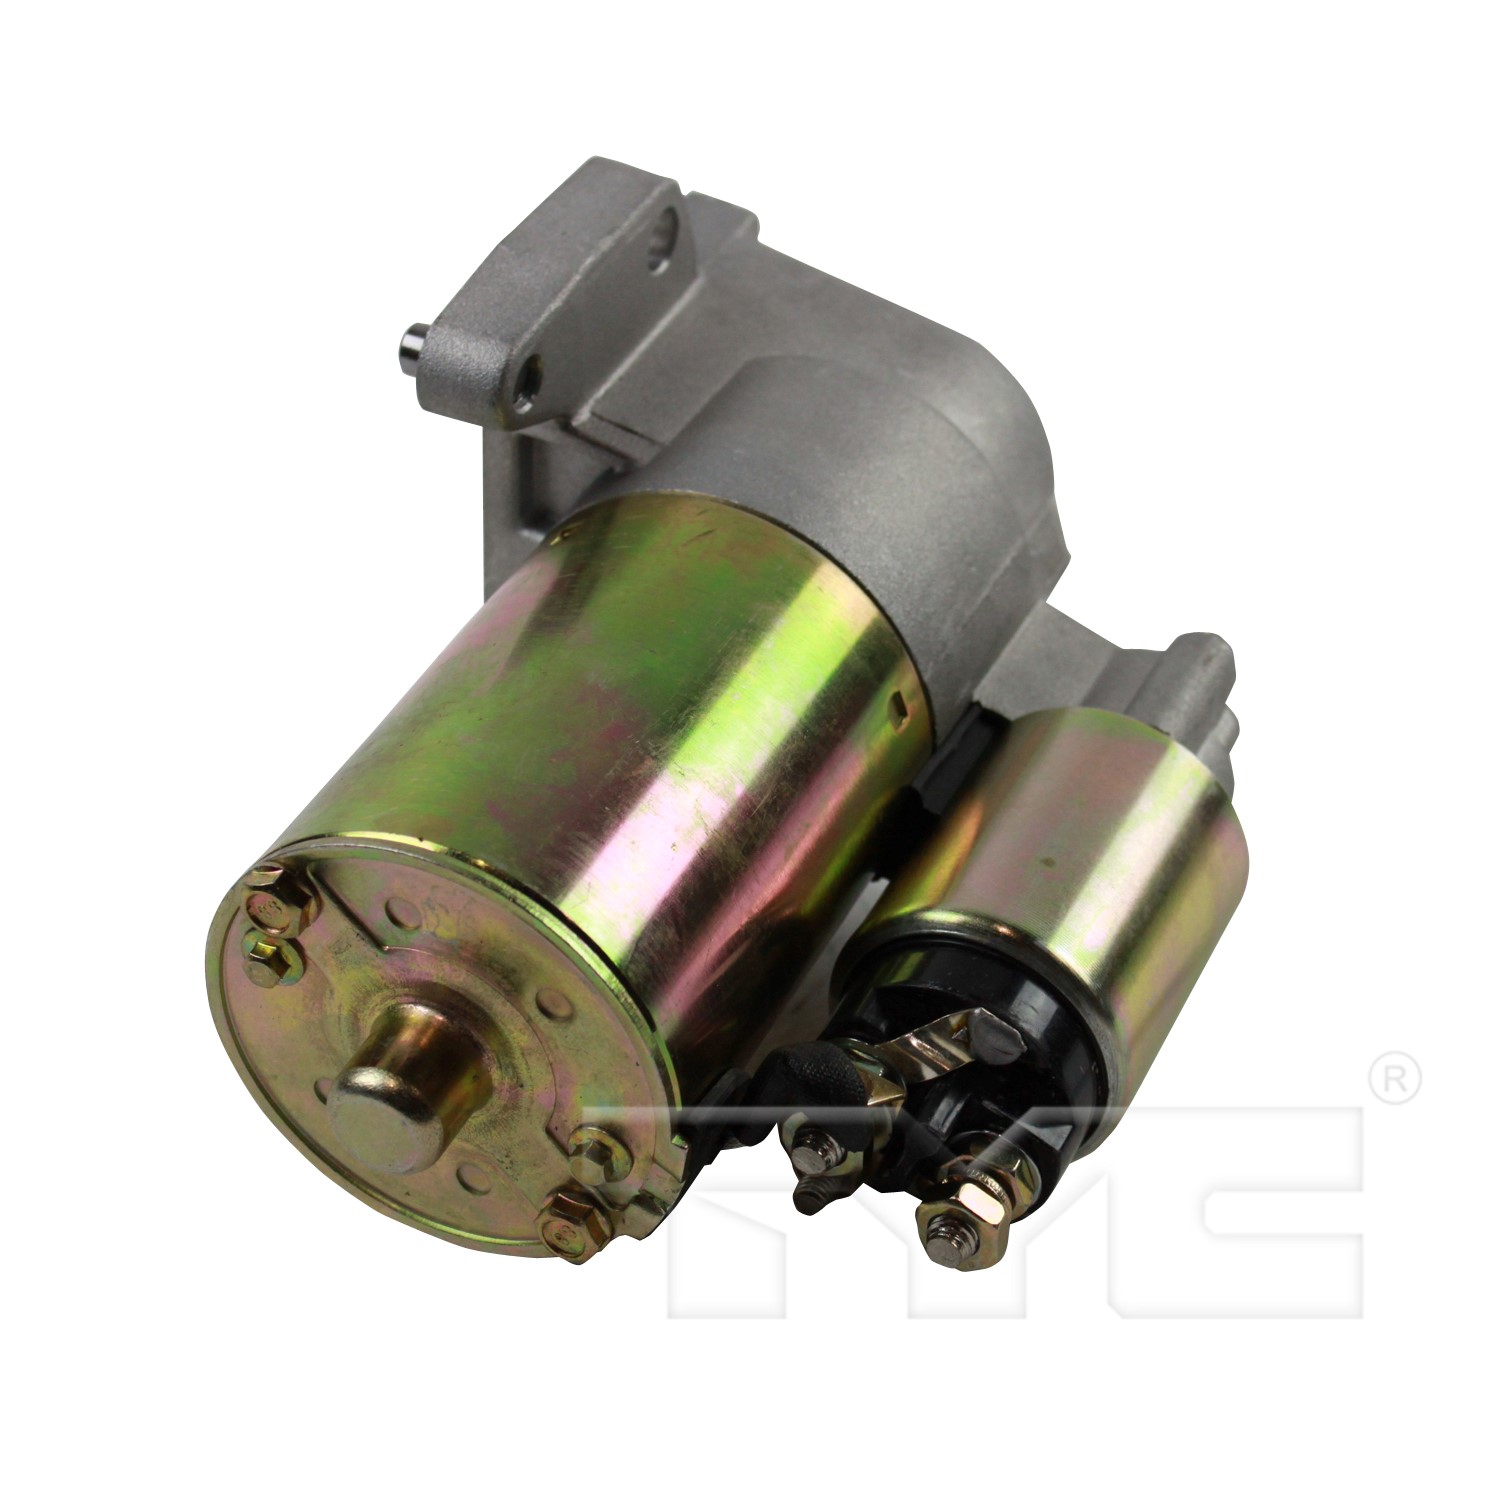 TYC-1-06643_NEW  TYC STARTER 12V 22T CCW PMGR FORD PMGR 1.5KW